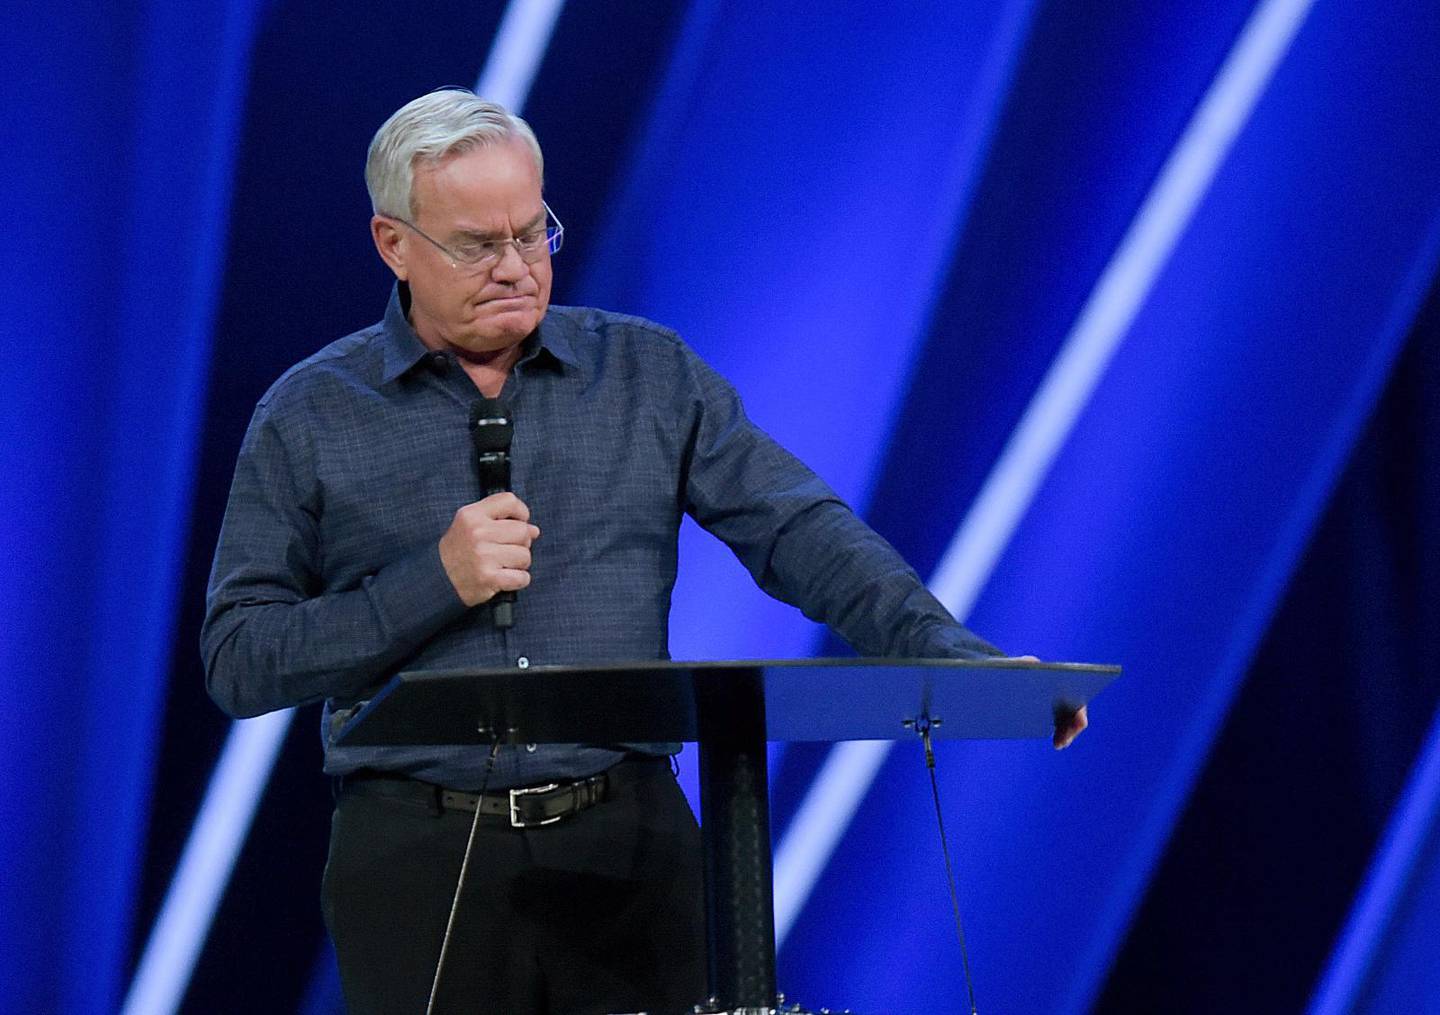 Willow Creek Community Church Senior Pastor Bill Hybels stands before his congregation, Tuesday, April 10, 2018, in South Barrington, Ill., where he announced his early retirement effective immediately, amid a cloud of misconduct allegations involving women in his congregation. The announcement was made during a special meeting at the church, one of the nation''s largest evangelical churches, which he founded. (Mark Black/Daily Herald via AP)